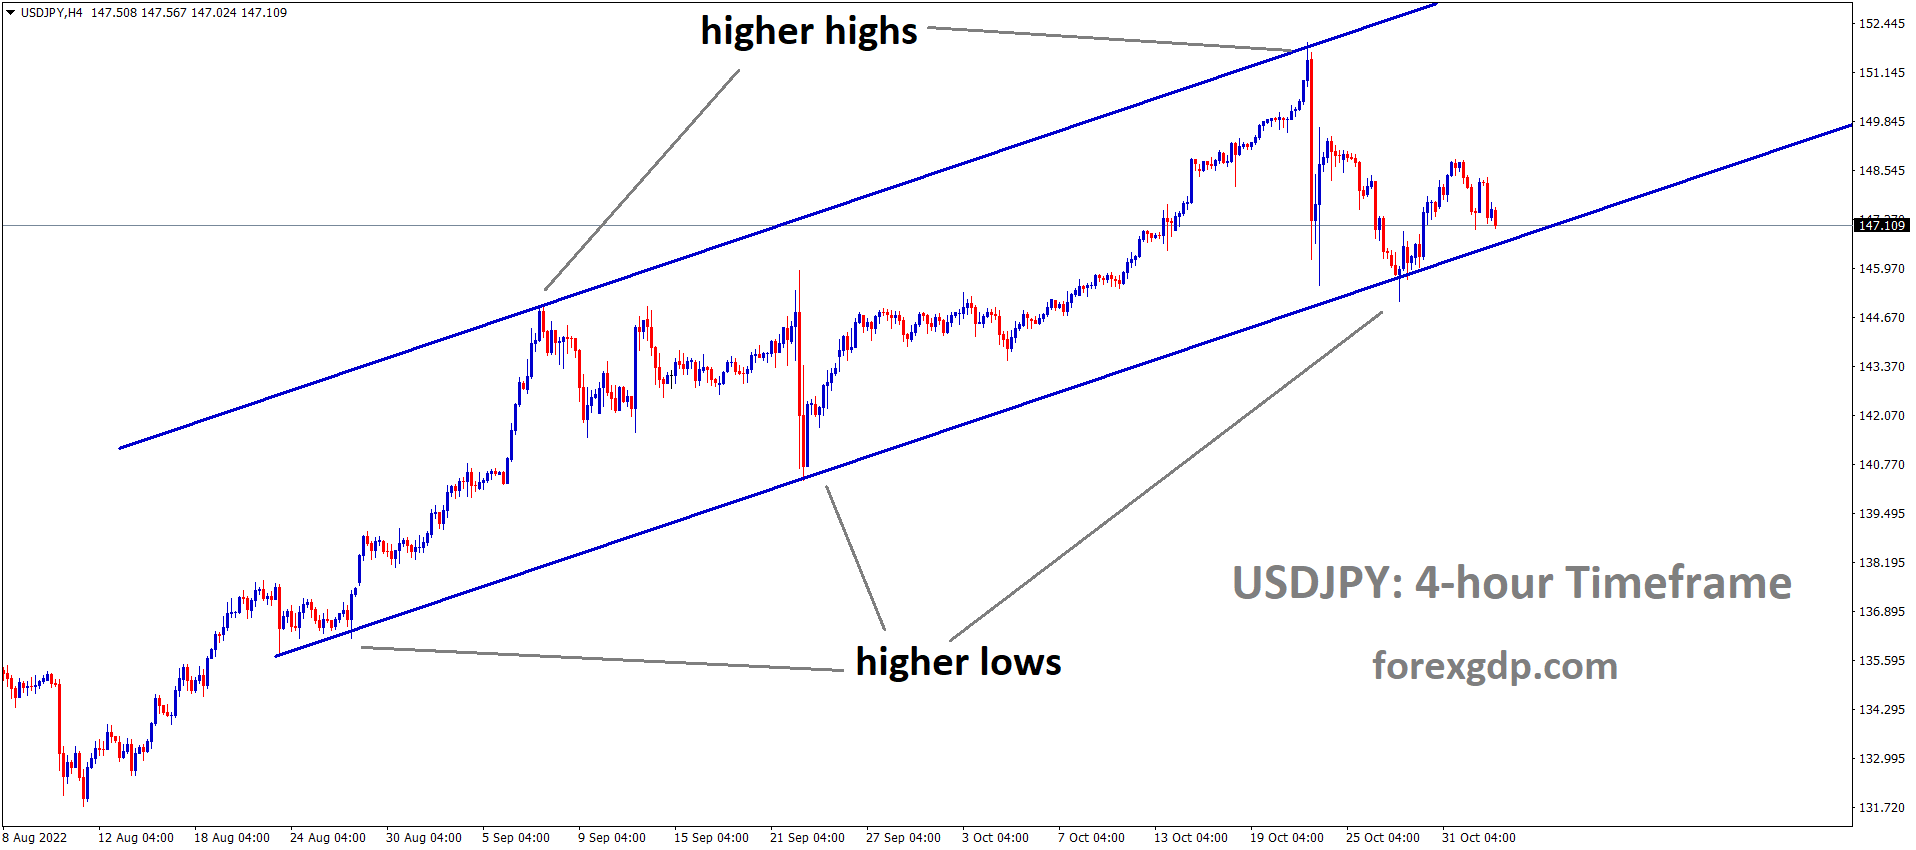 USDJPY is moving in an Ascending channel and the market has reached the higher low area of the channel1